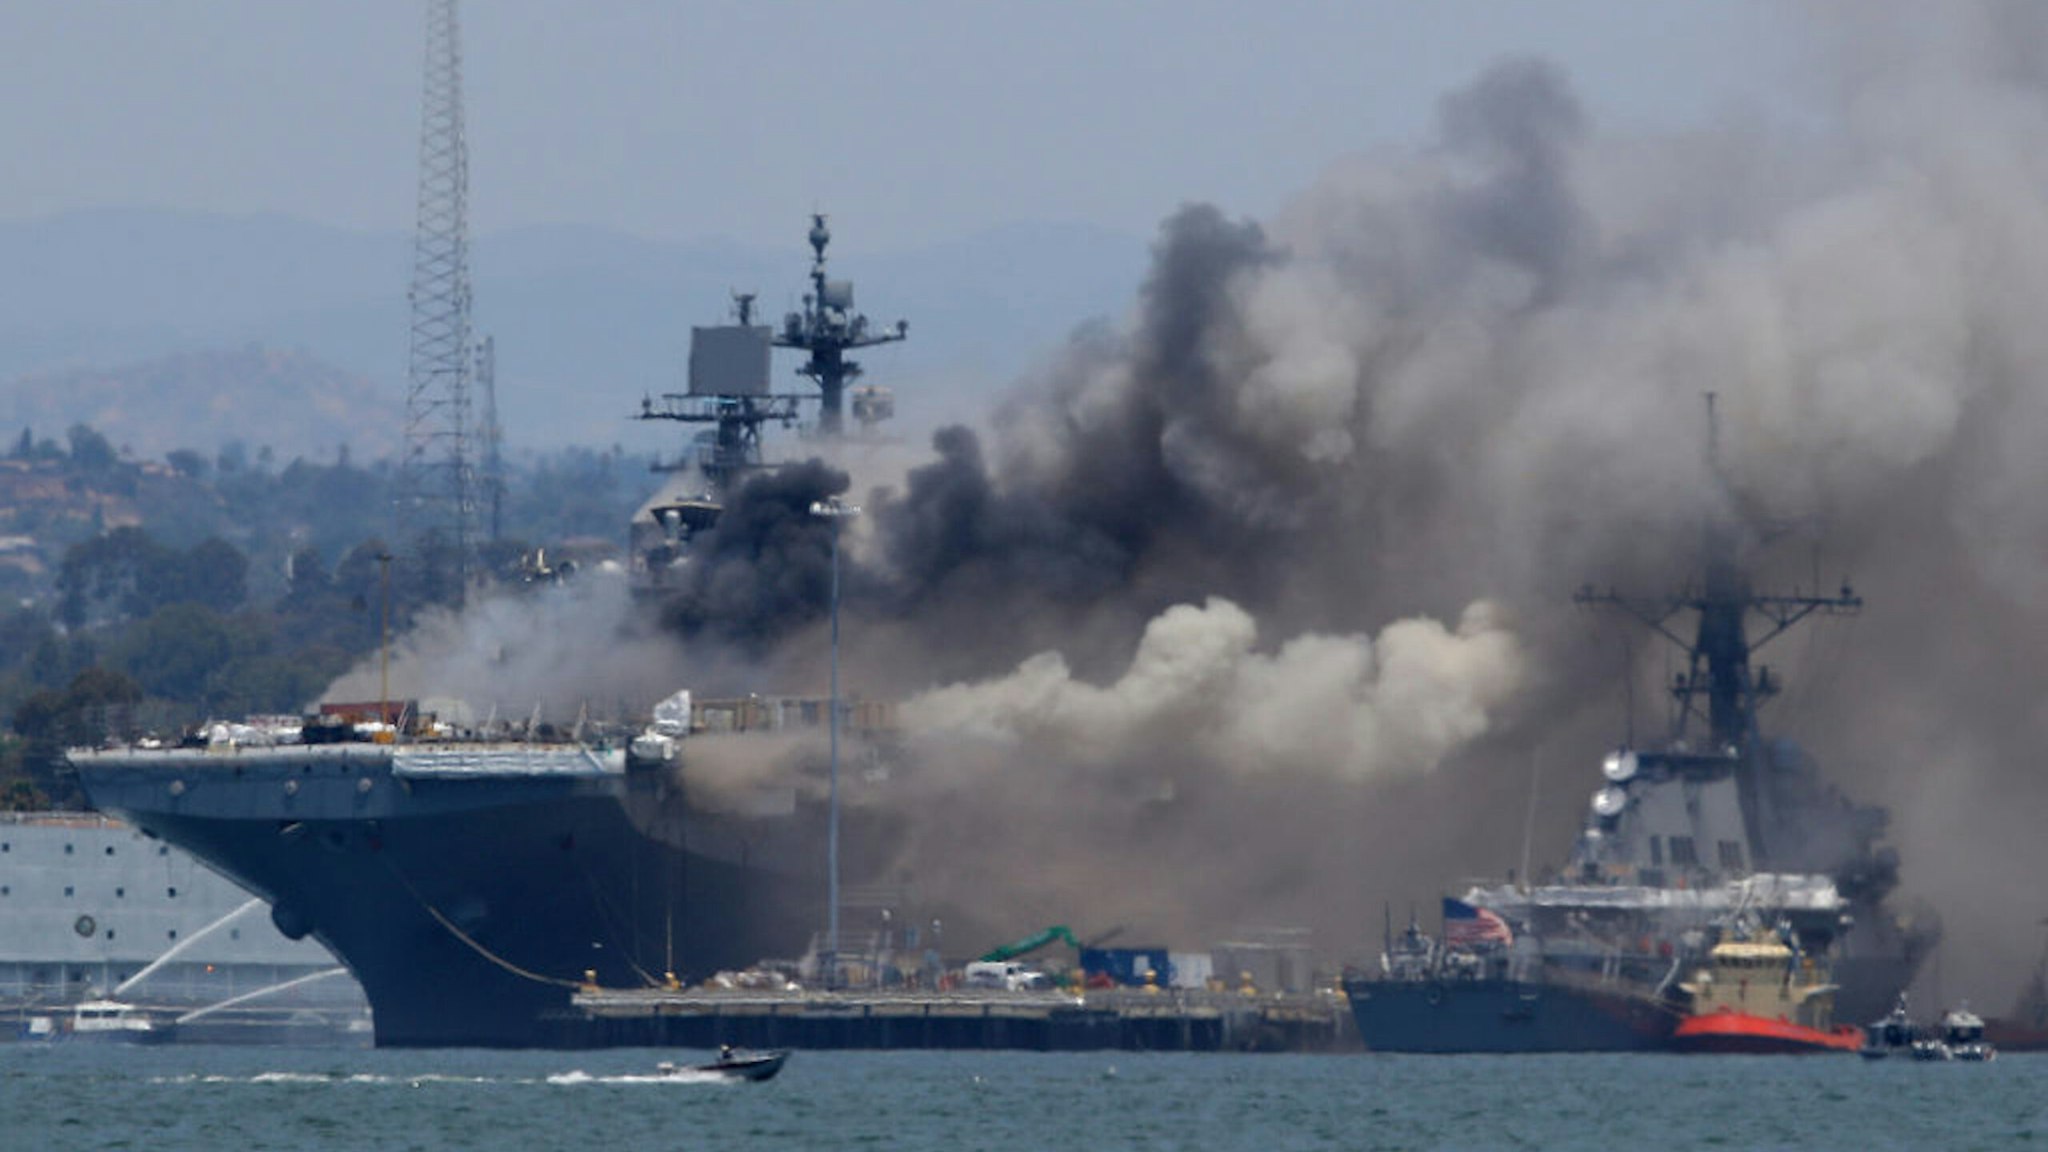 SAN DIEGO, CALIFORNIA - JULY 12: A fire burns on the amphibious assault ship USS Bonhomme Richard at Naval Base San Diego on July 12, 2020 in San Diego, California. There was an explosion on board the ship with multiple injuries reported.